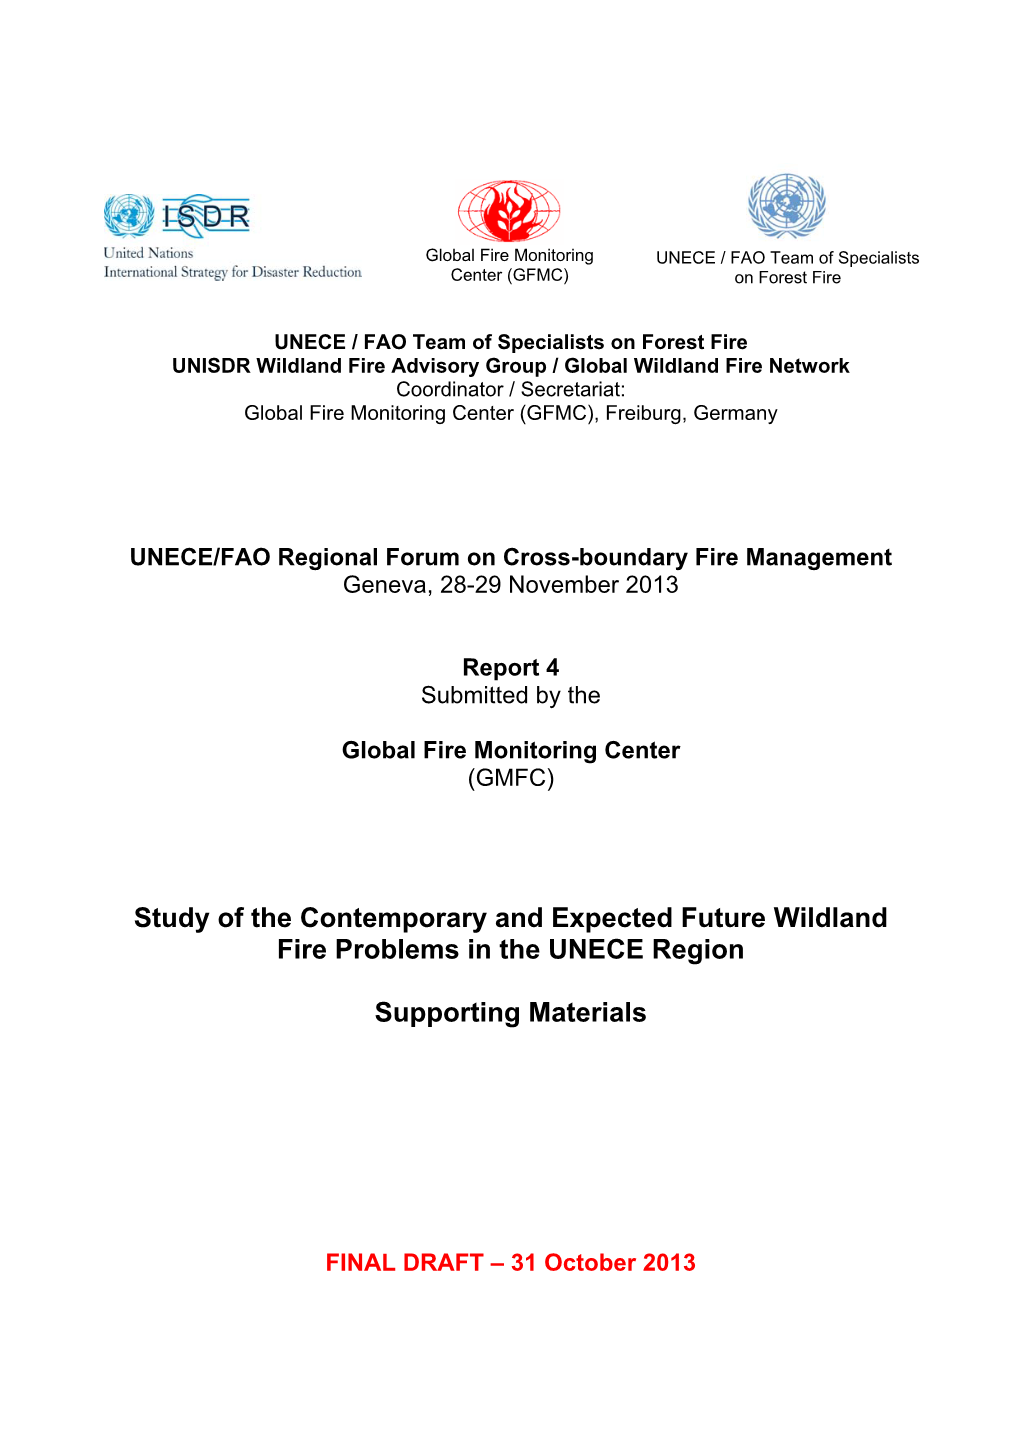 Study of the Contemporary and Expected Future Wildland Fire Problems in the UNECE Region